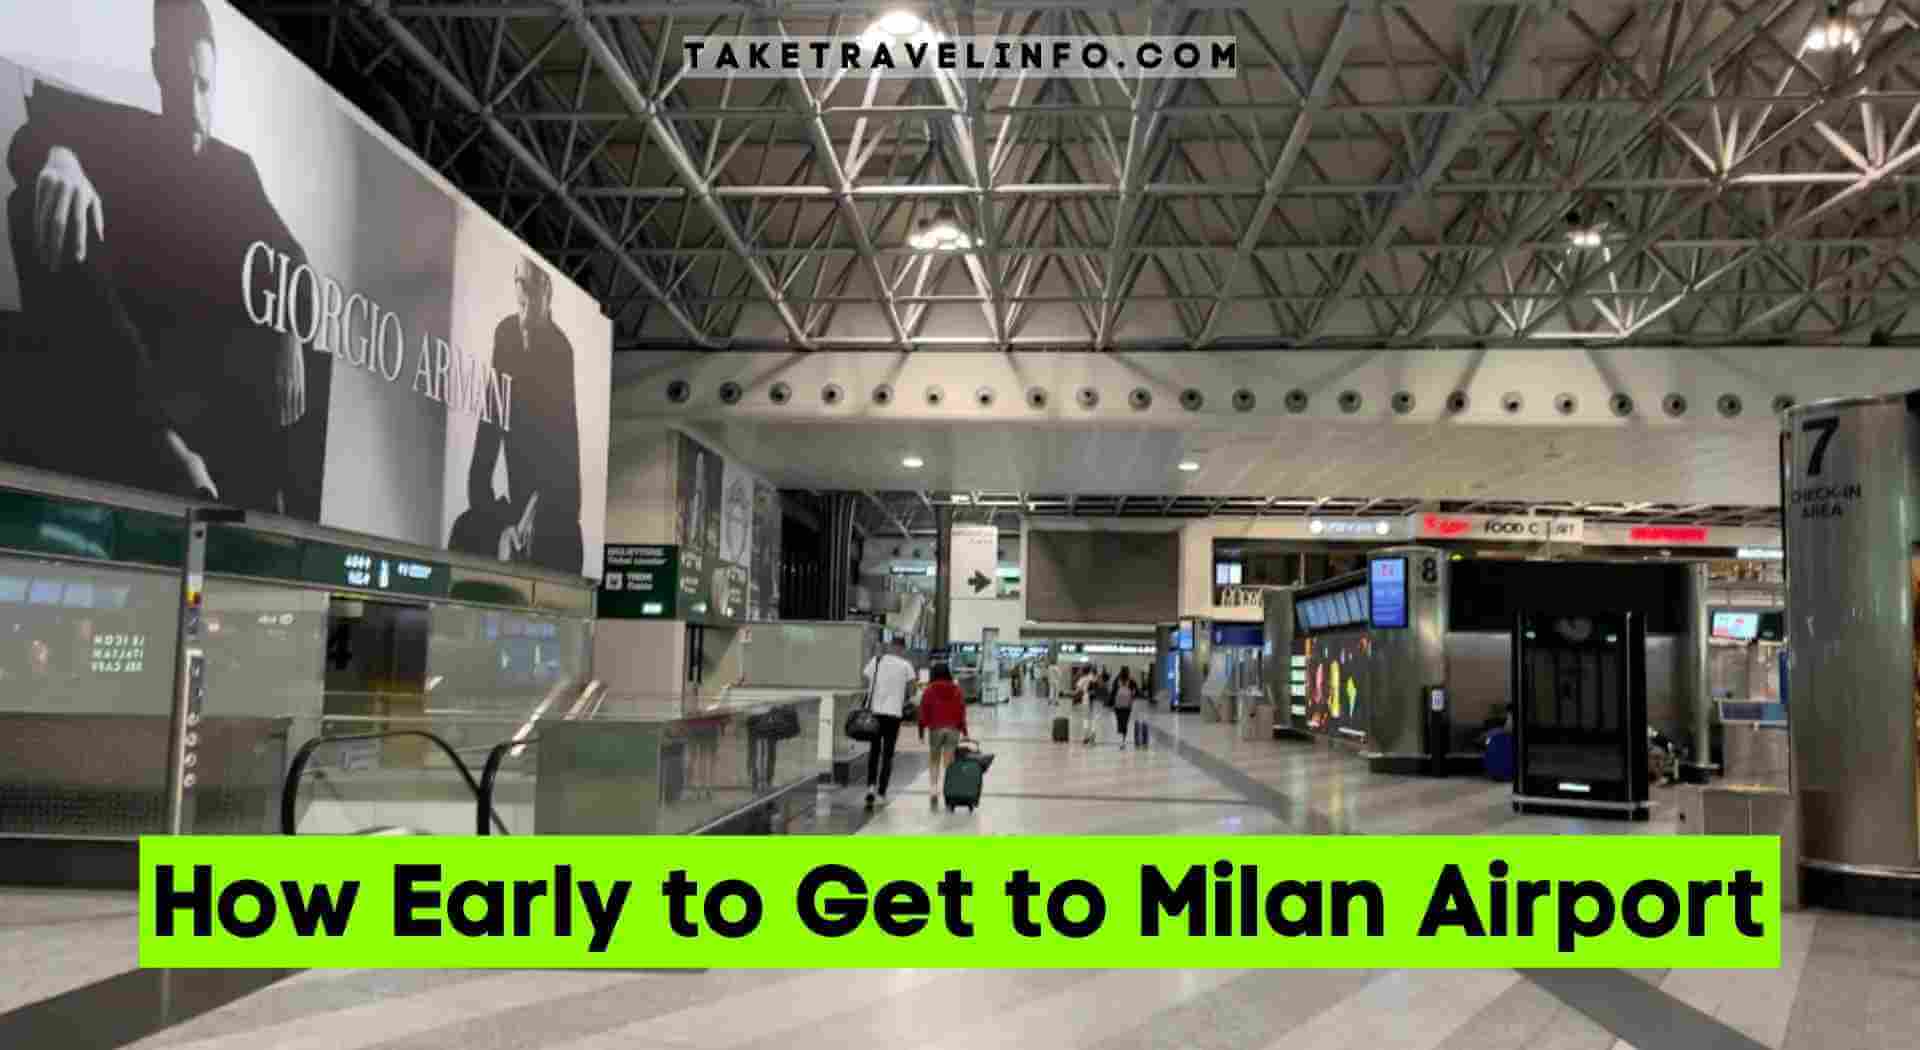 How Early to Get to Milan Airport